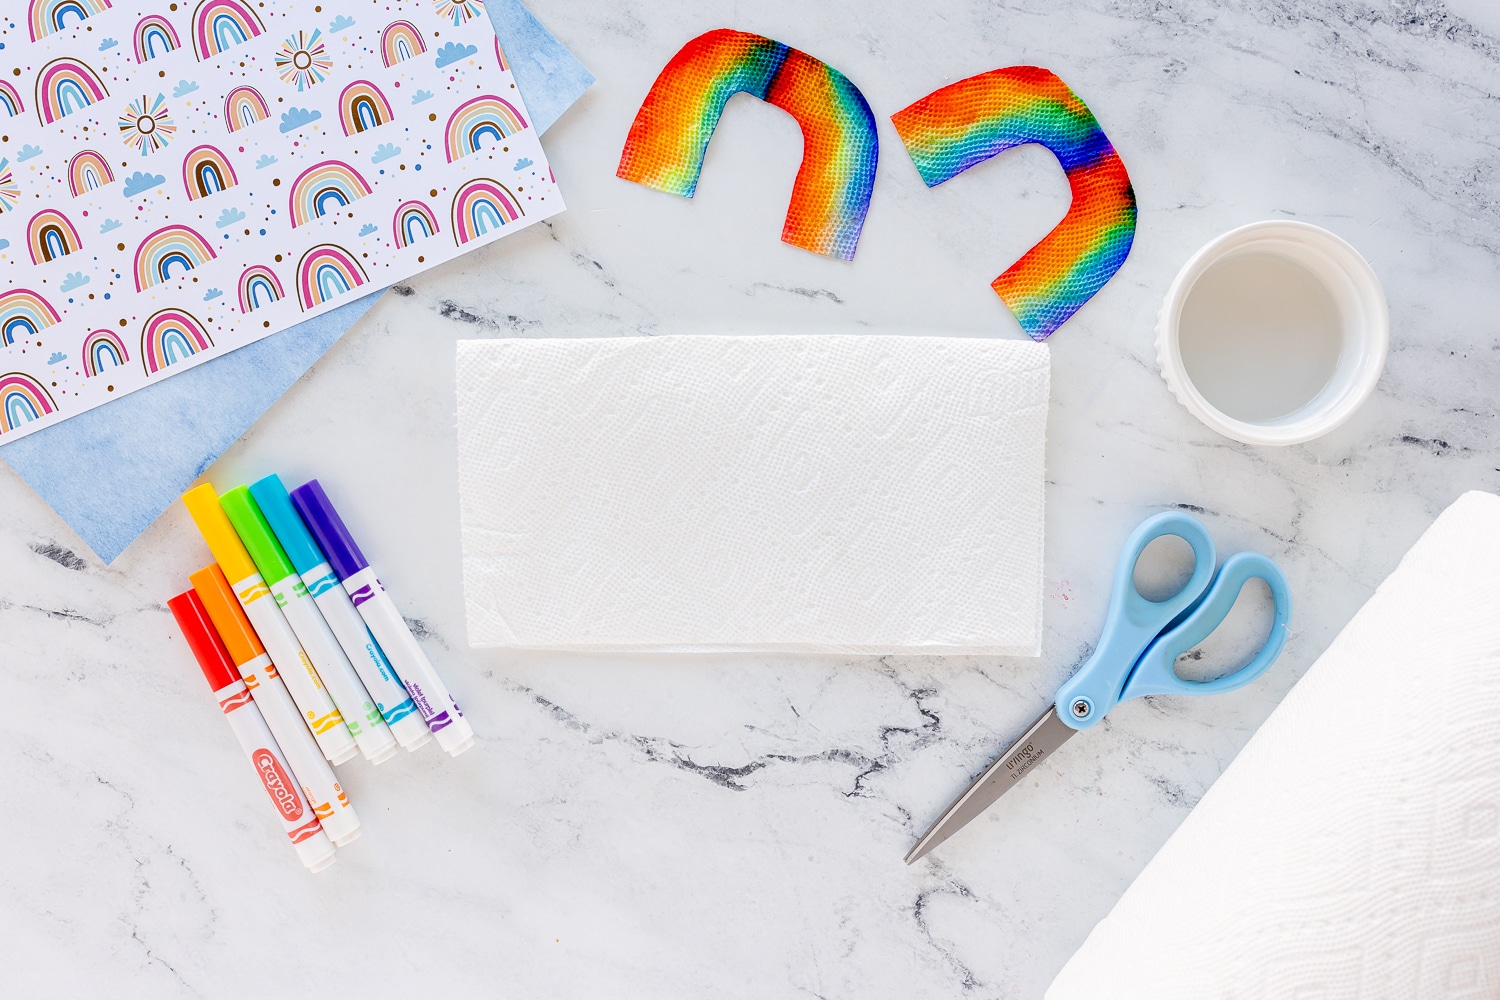 supplies needed to grow a rainbow on counter - markers, paper towel, water